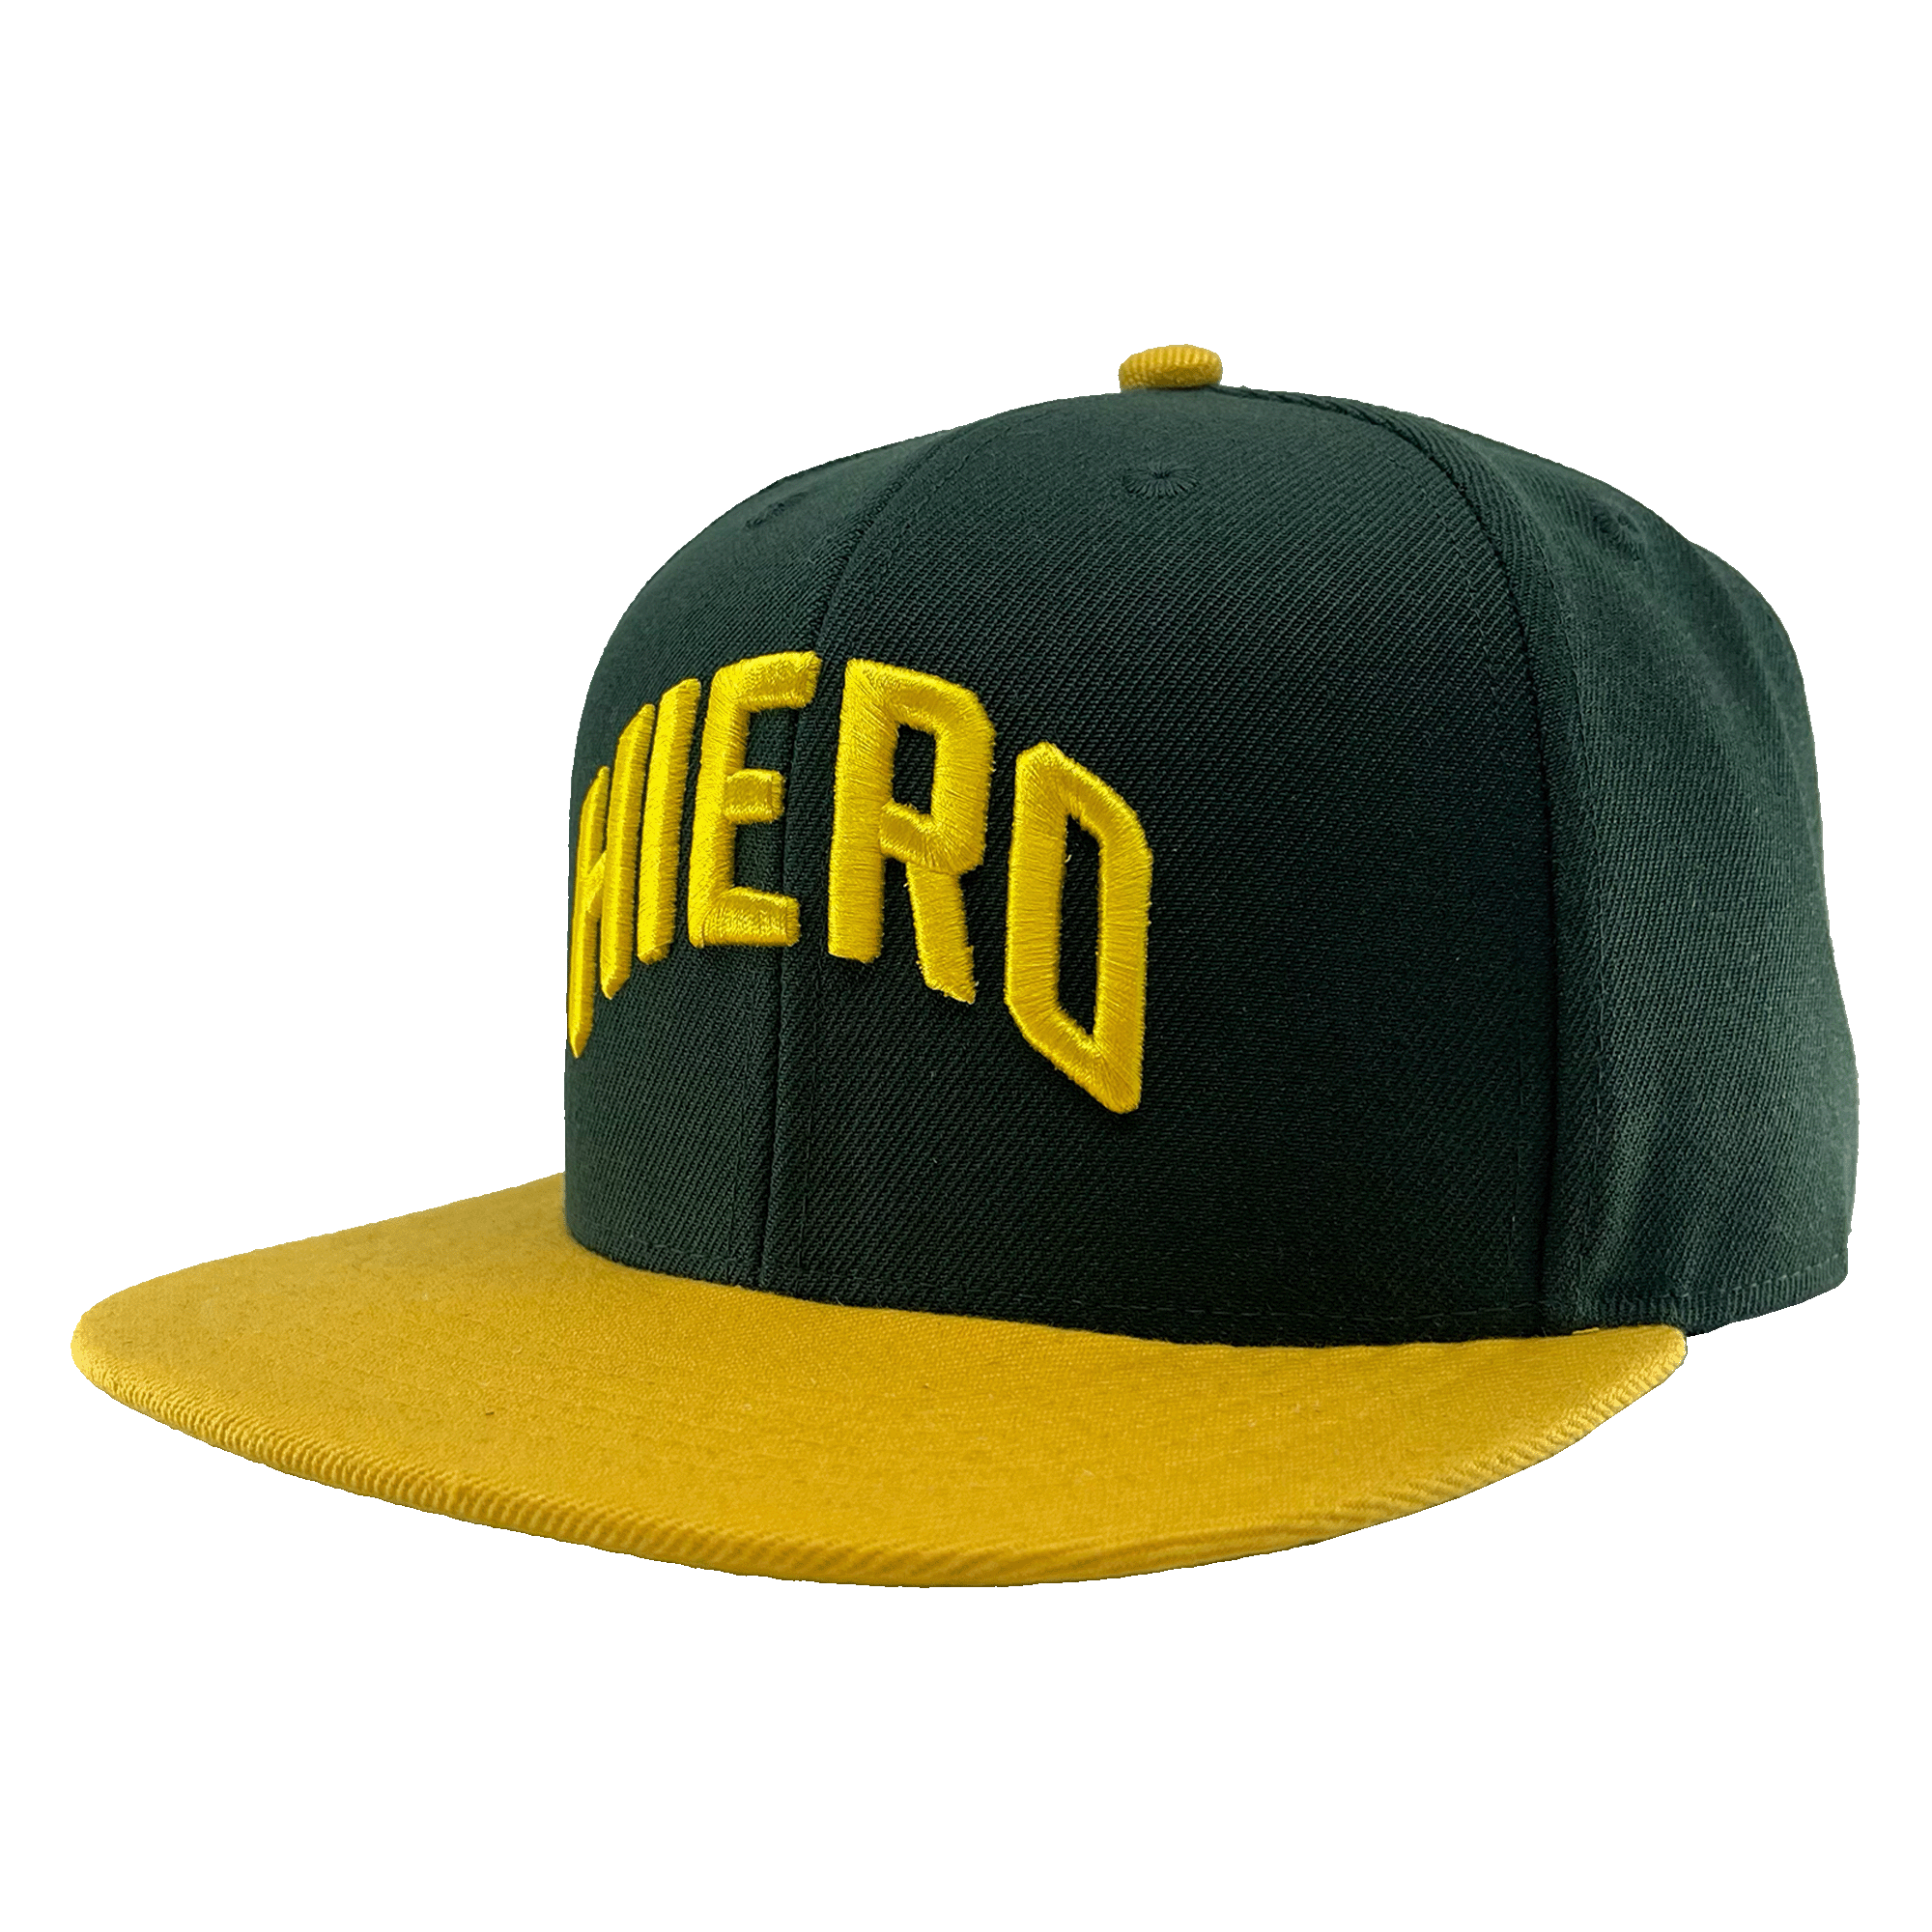 The green snapback cap with a yellow flat-billed visor and an embroidered HIERO wordmark on the crown.